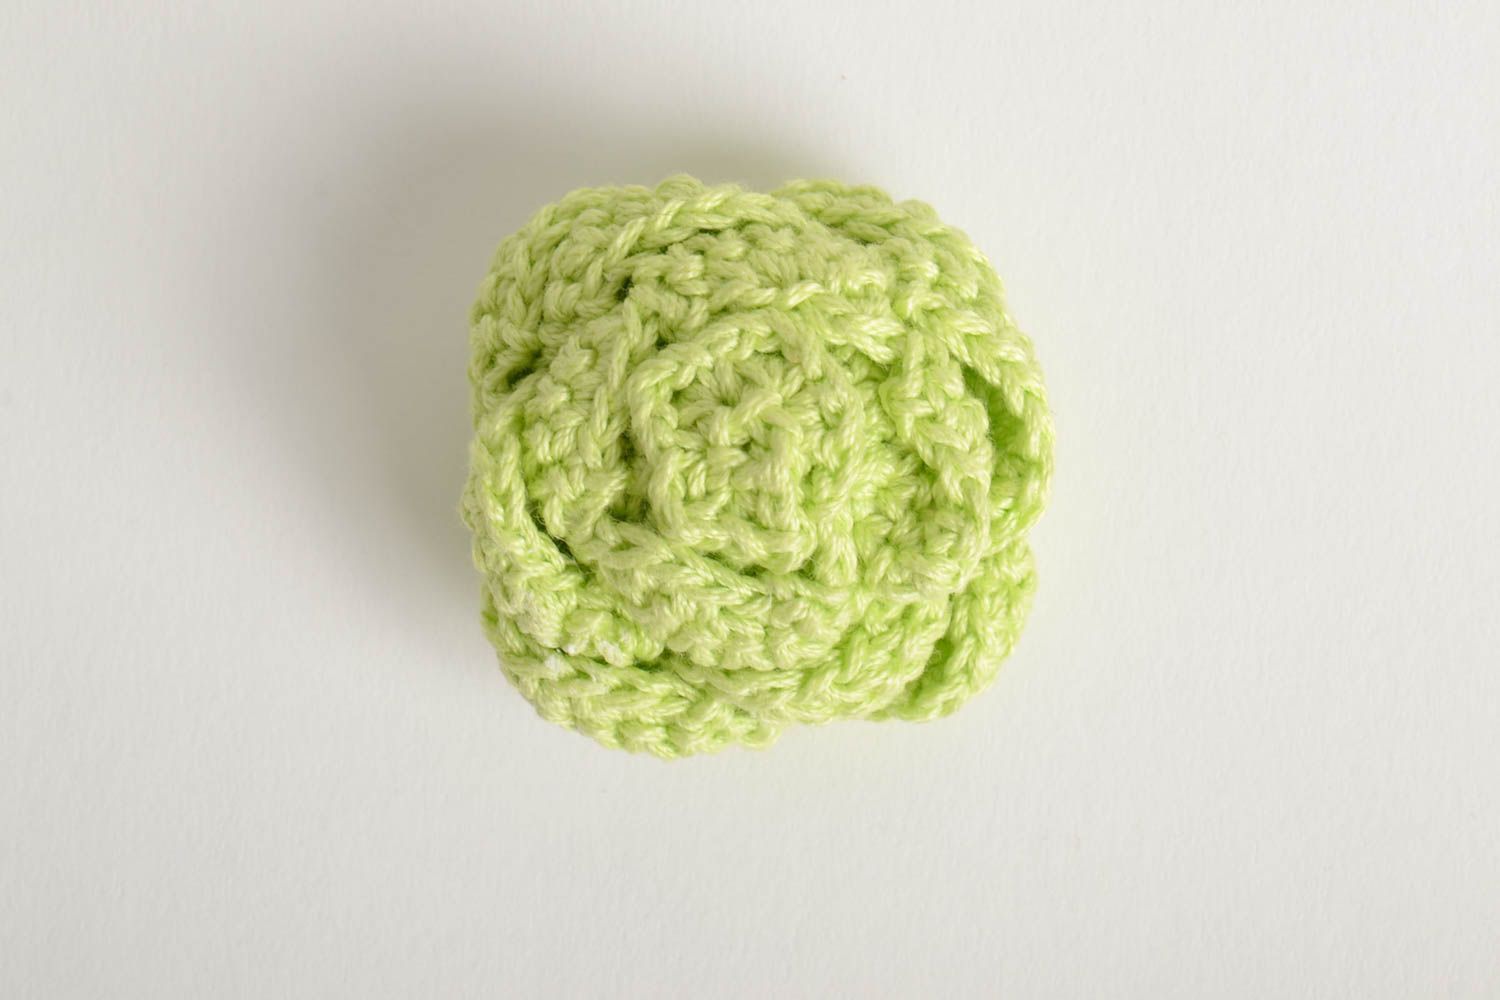 Crocheted textile cabbage handmade stylish vegetable kids cute soft toy  photo 4